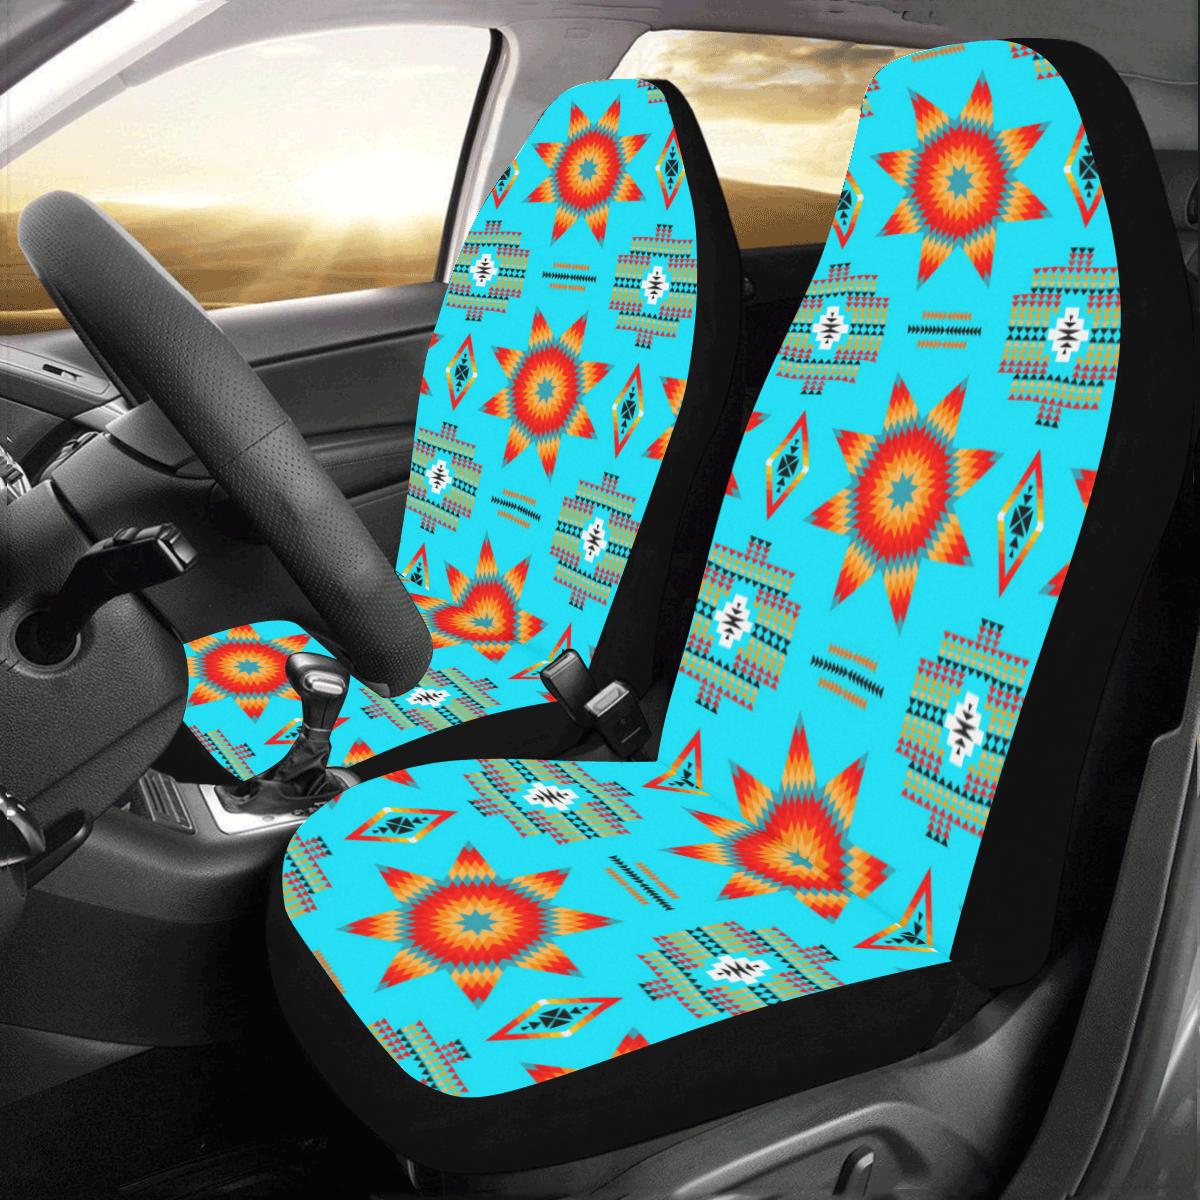 Rising Star Harvest Moon Car Seat Covers (Set of 2) Car Seat Covers e-joyer 